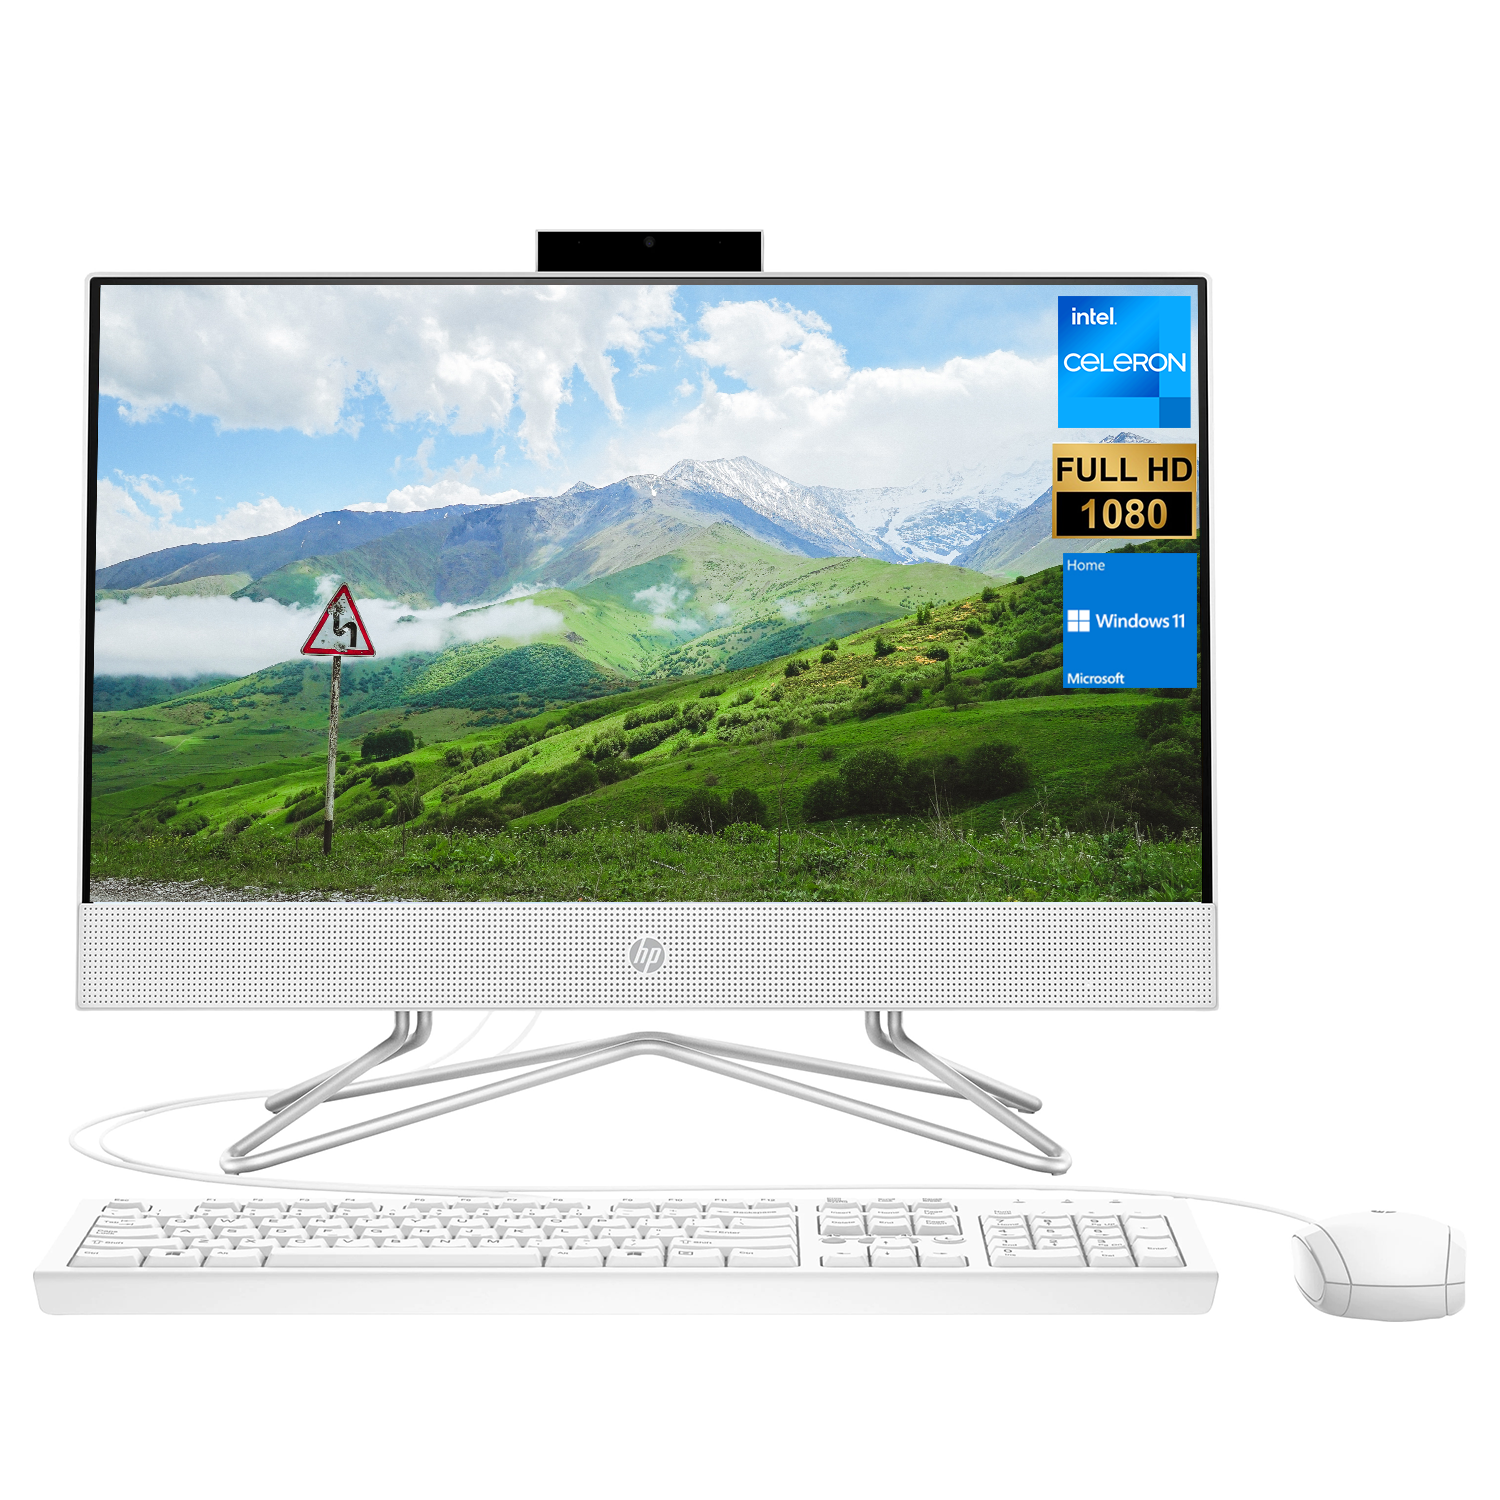 HP All-in-One Desktop, 21.5" FHD Screen, Intel Celeron J4025, 32GB RAM, 1TB SSD, Webcam, HDMI, Media Card Reader, Wi-Fi, Wired KB & Mouse, Windows 11 Home - image 1 of 5